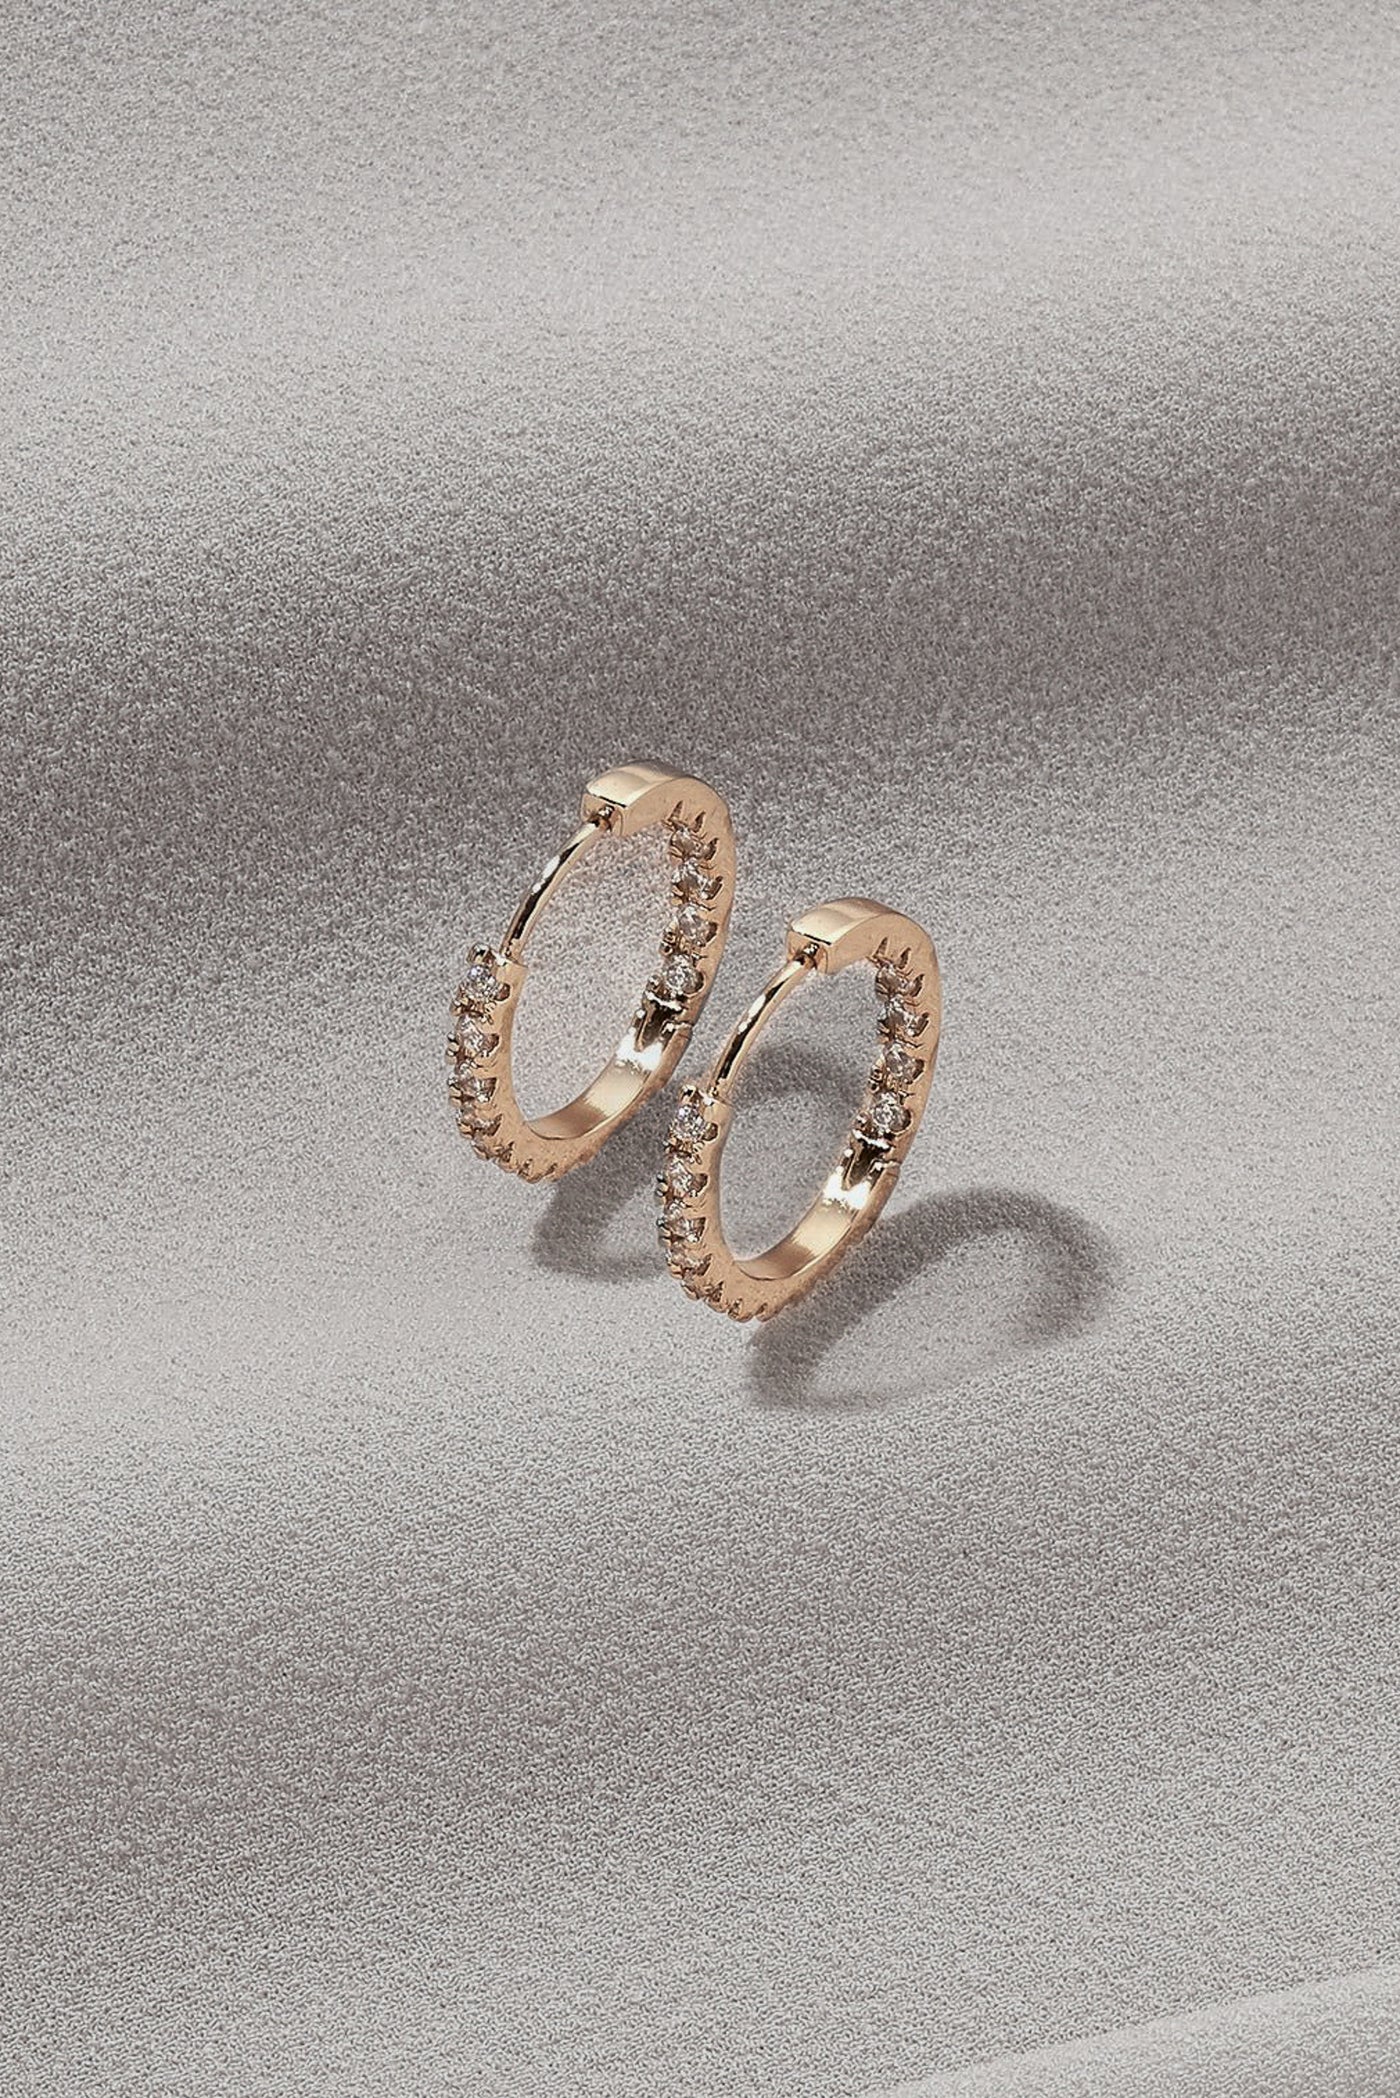 A basic shot of gold, mini hoop earrings with gem details and a regular clasp.